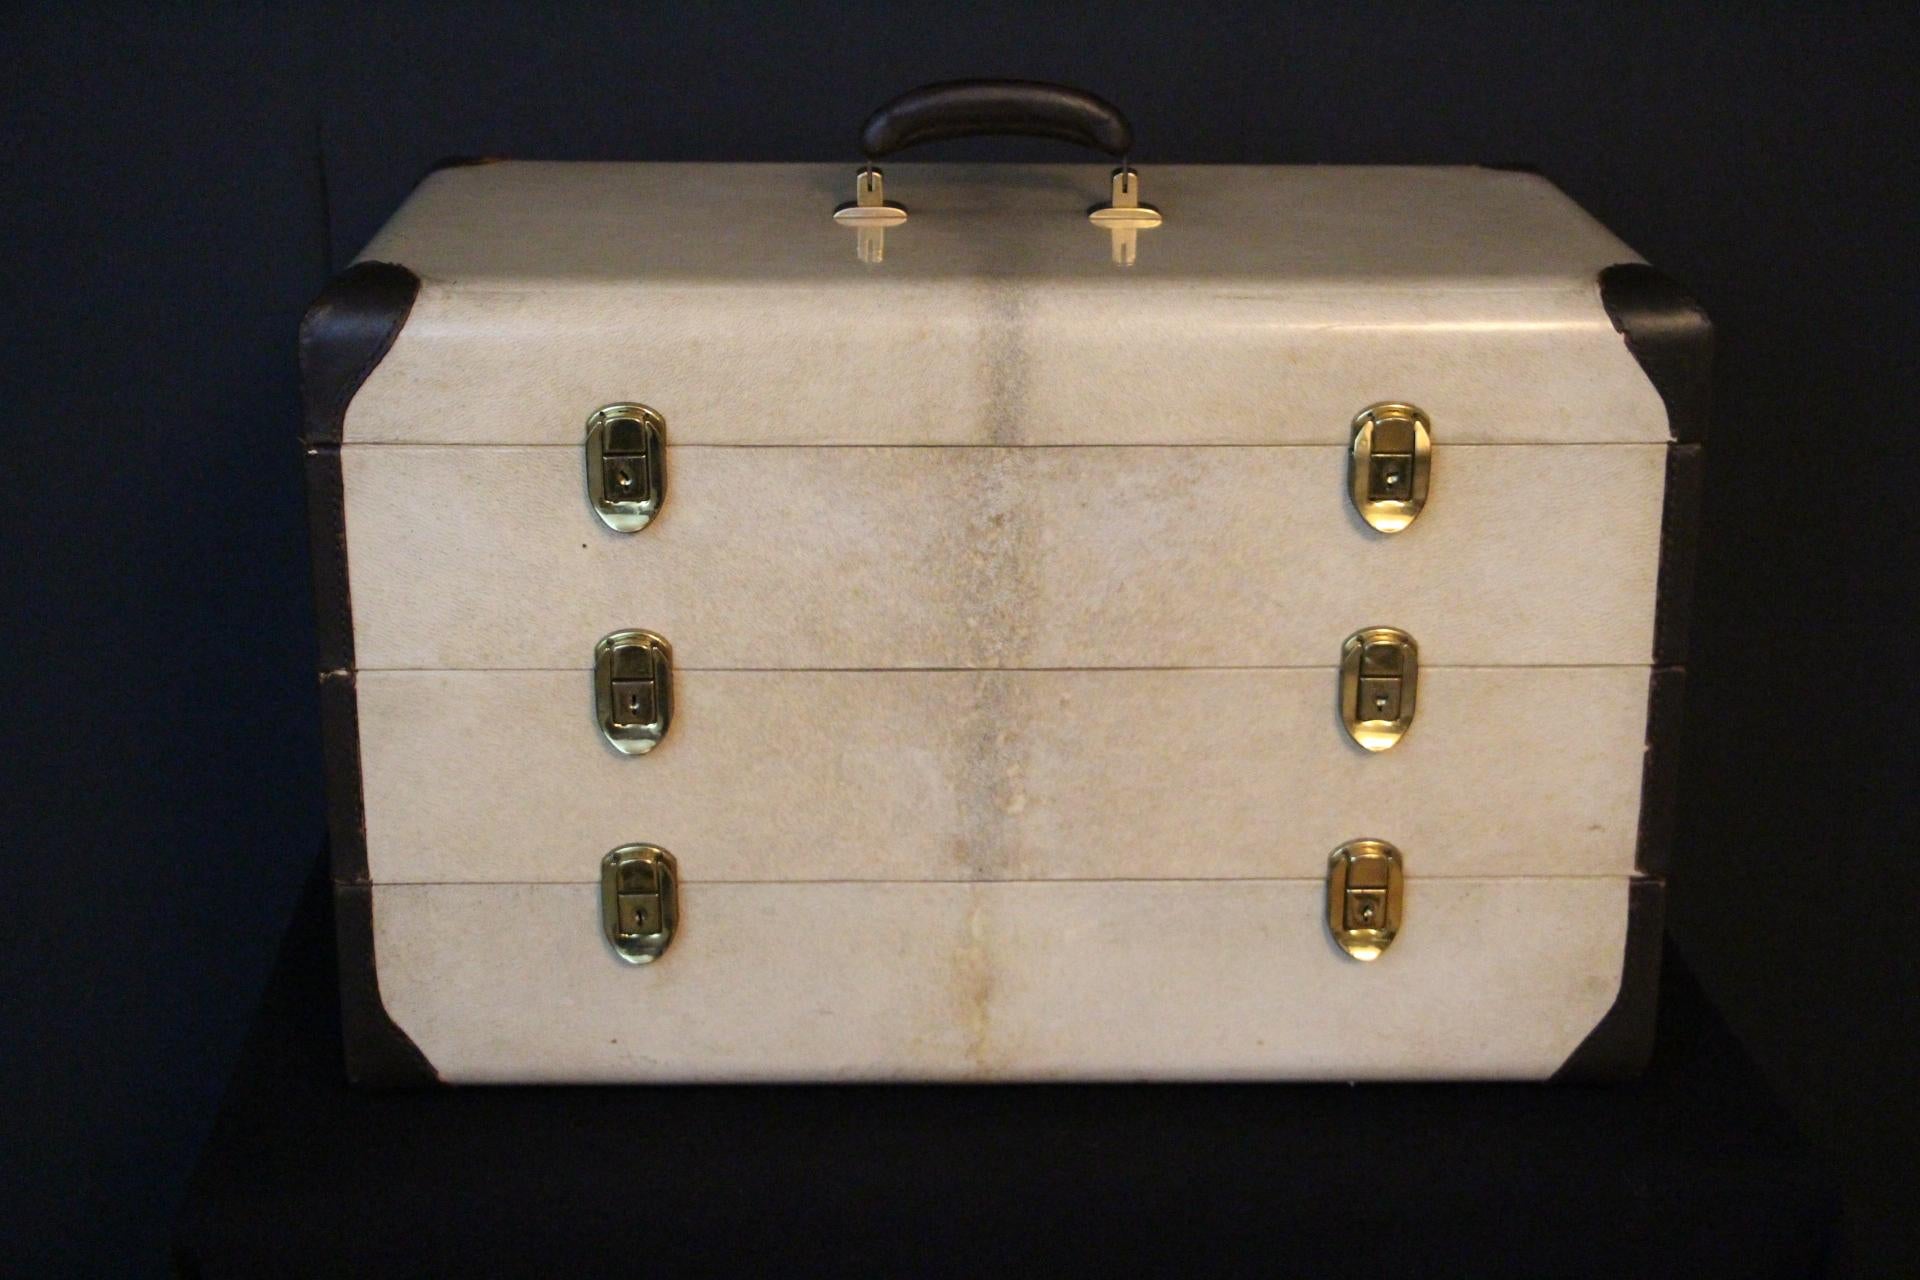 Vintage Maison Goyard Trunks and Luggage - 2 For Sale at 1stDibs